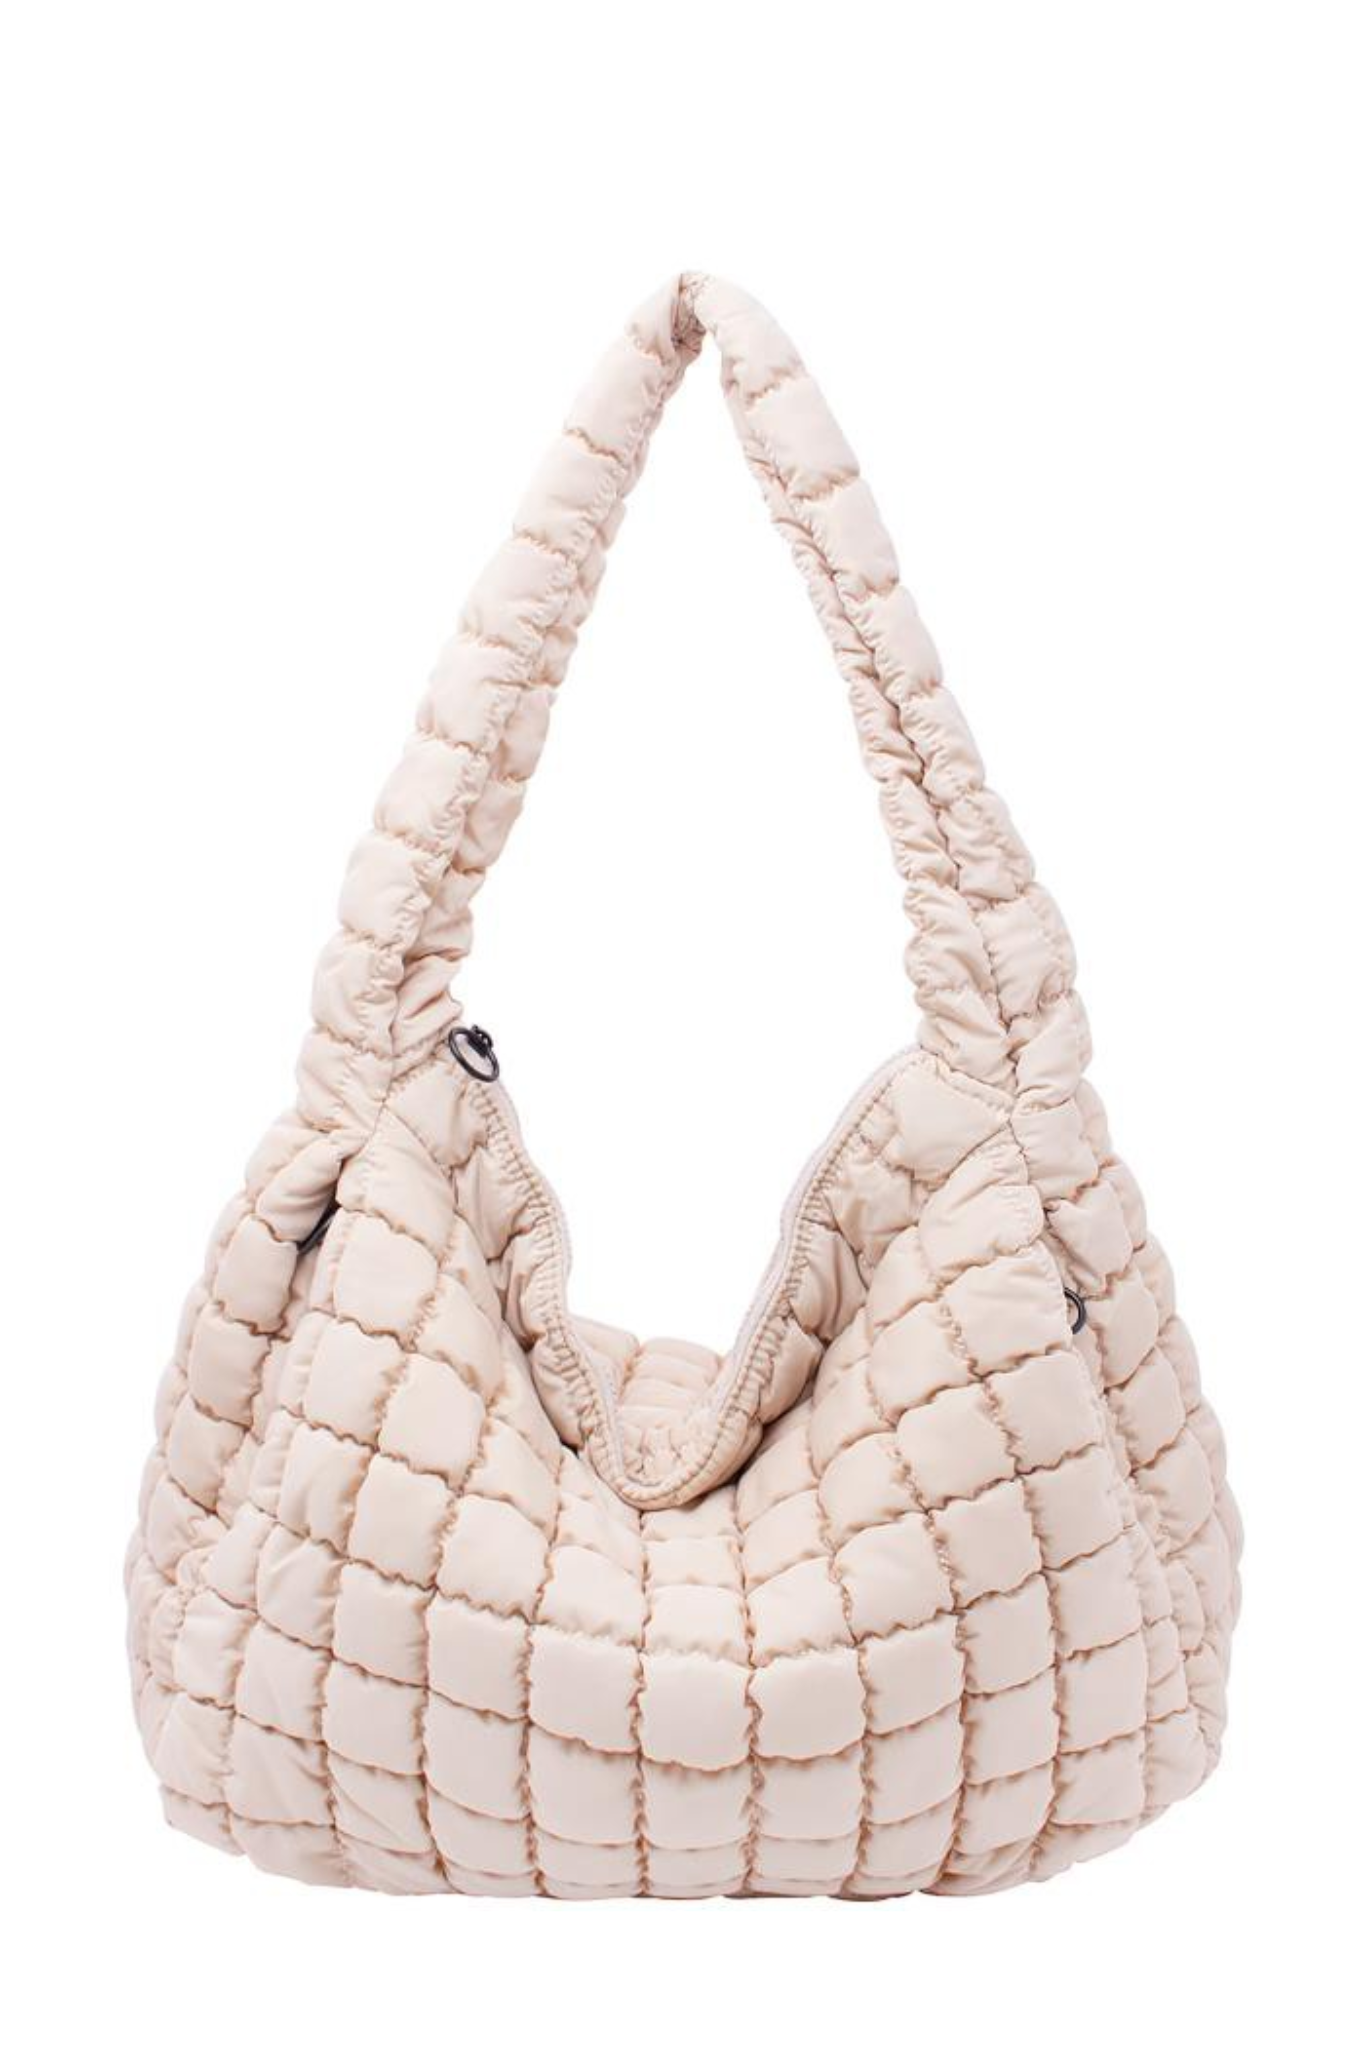 View 2 of Cleo Quilted Hobo Bag in Ivory, a Bags from Larrea Cove. Detail: .